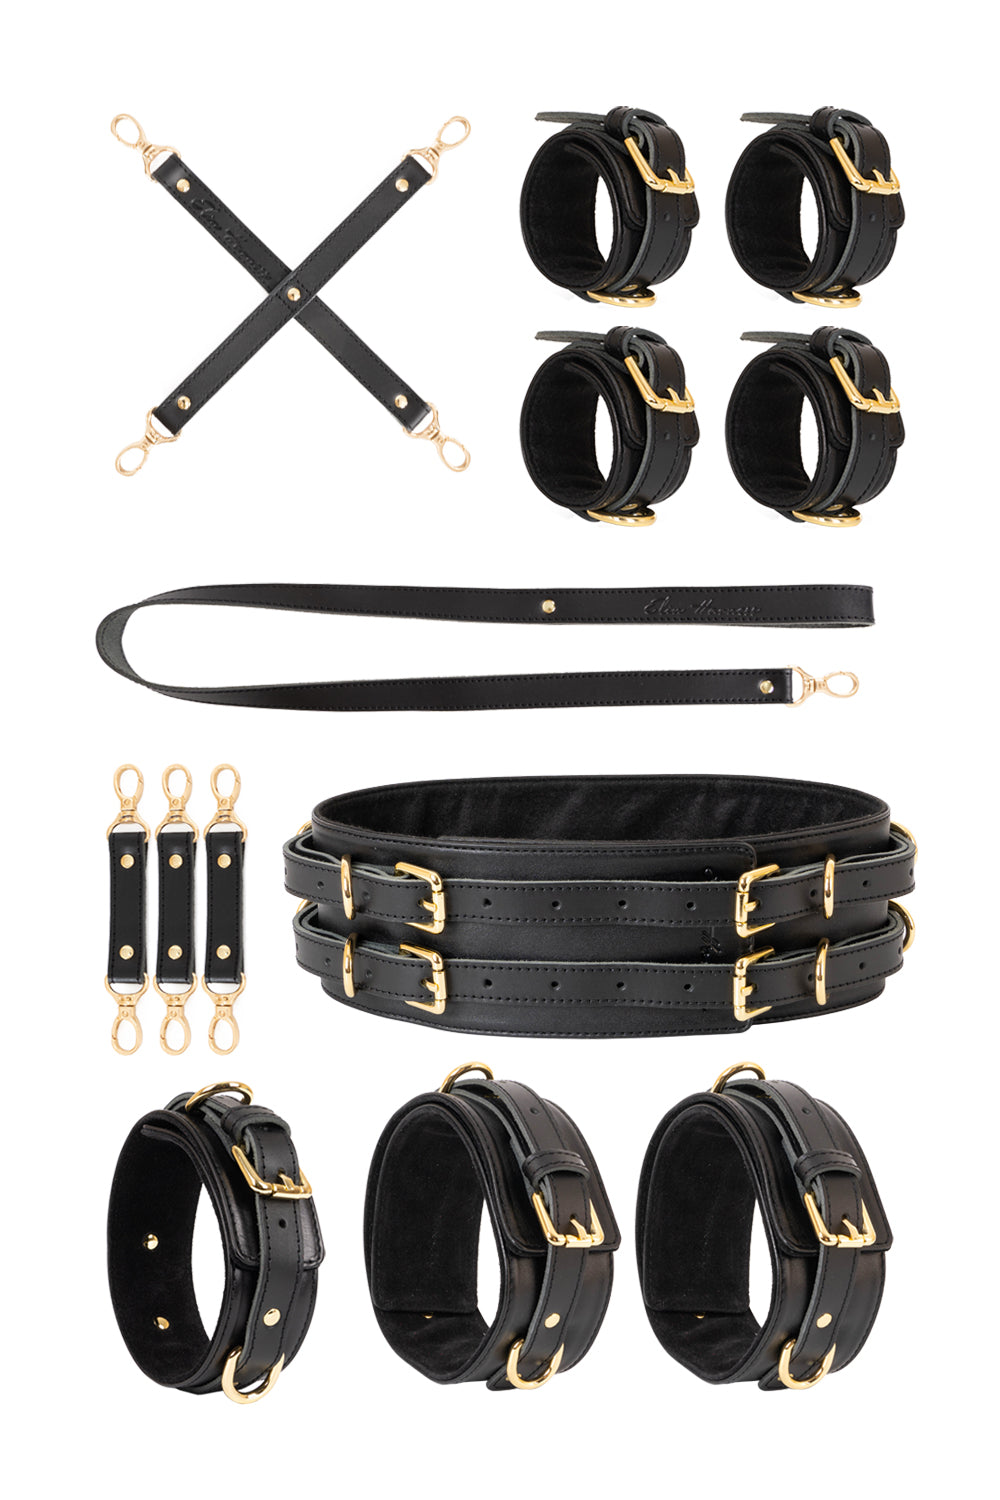 6 in 1 Leather Harness Bondage Set. 10 colors